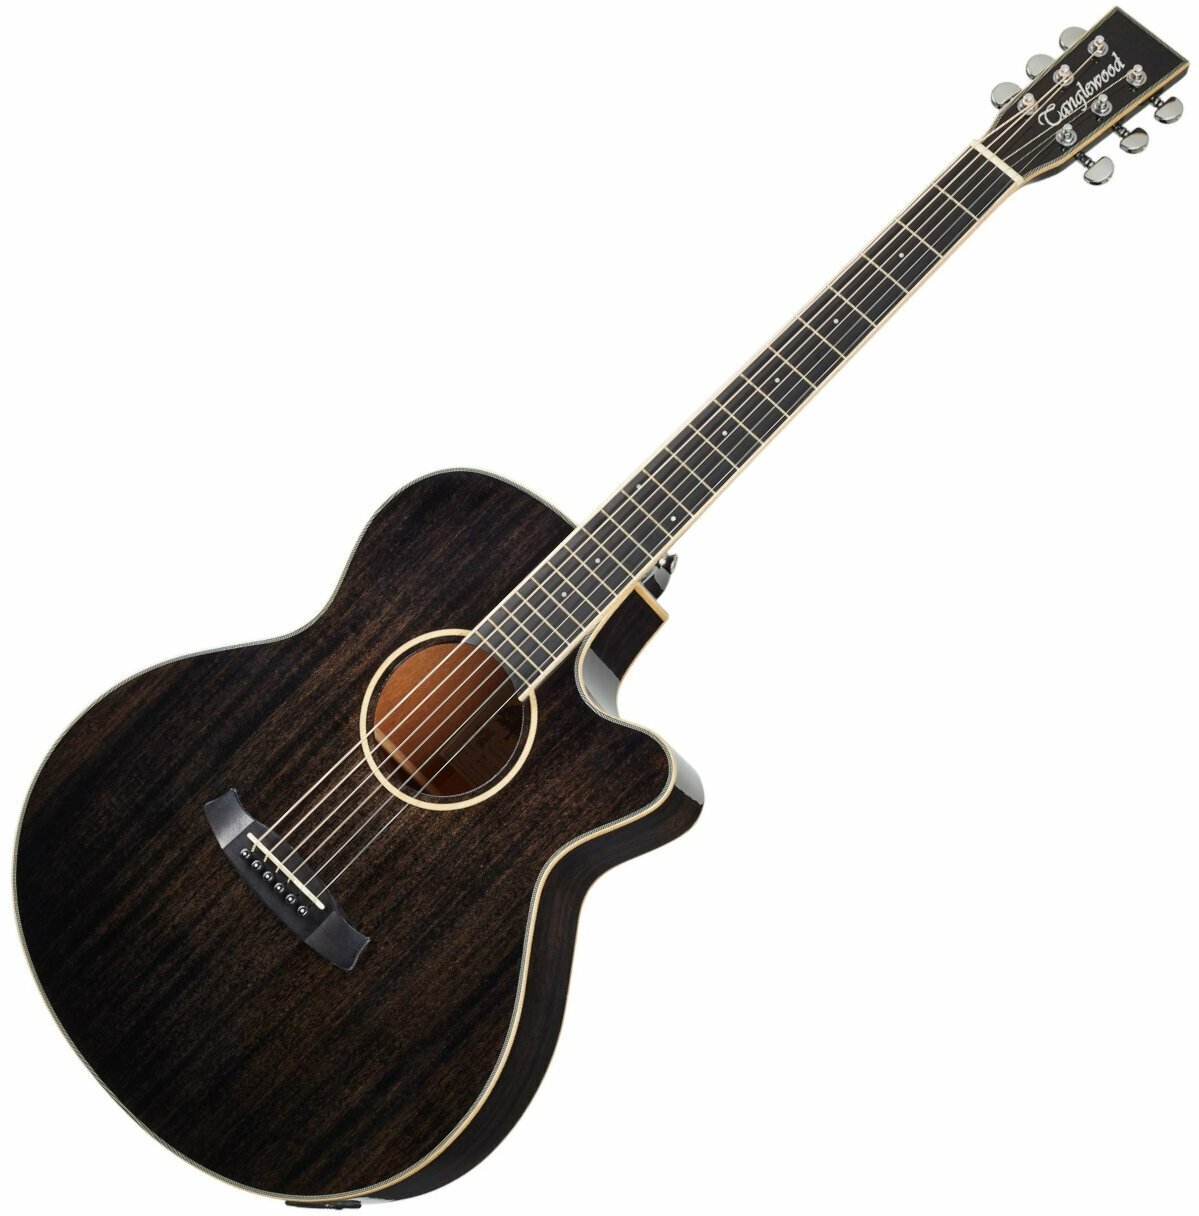 Electro-acoustic guitar Tanglewood TW4 E BS Black Shadow Gloss